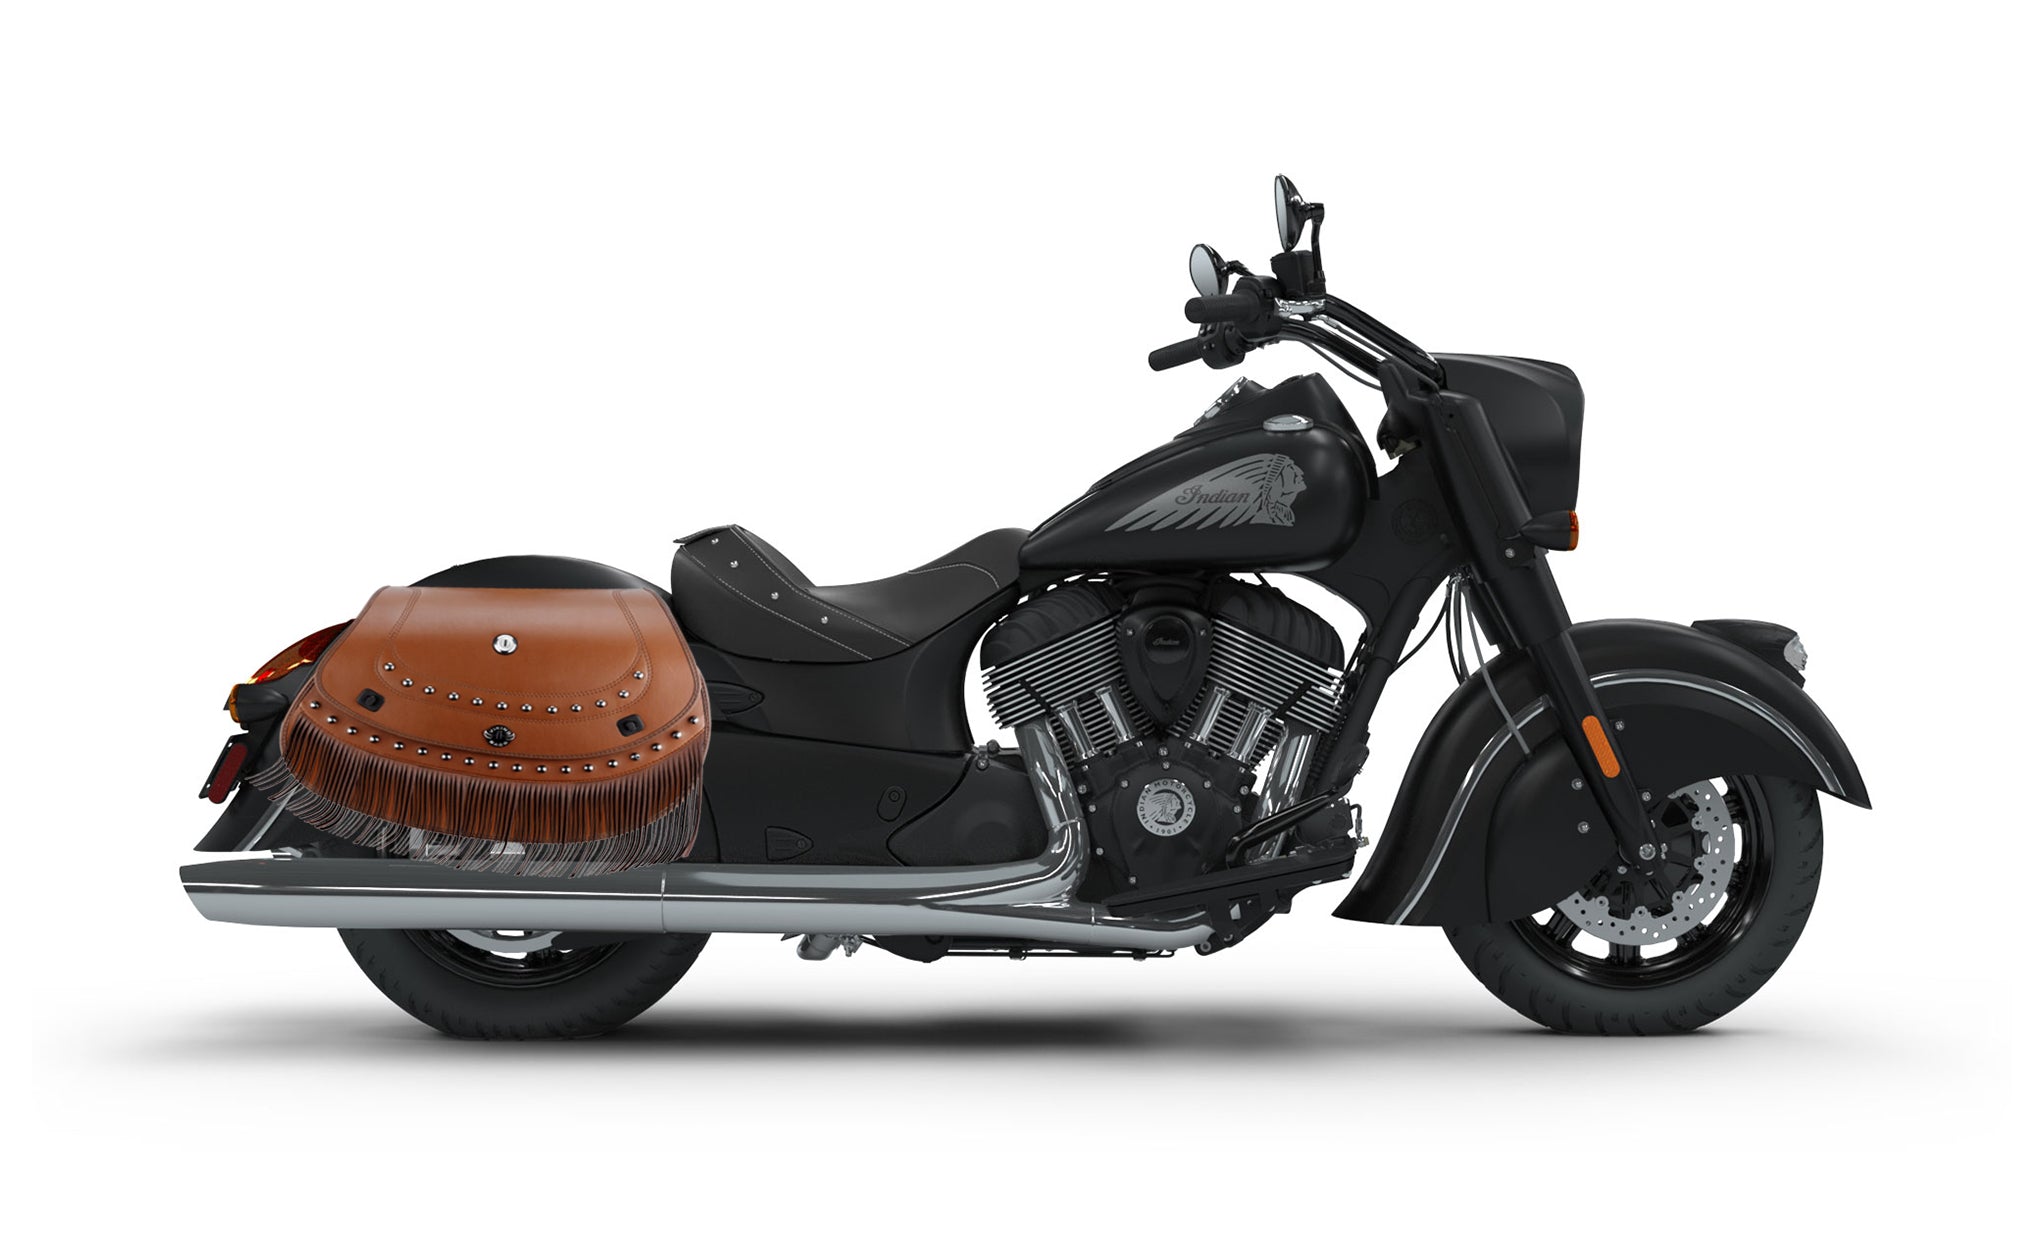 Viking Mohawk Brown Extra Large Indian Chief Darkhorse Specific Leather Motorcycle Saddlebags on Bike Photo @expand